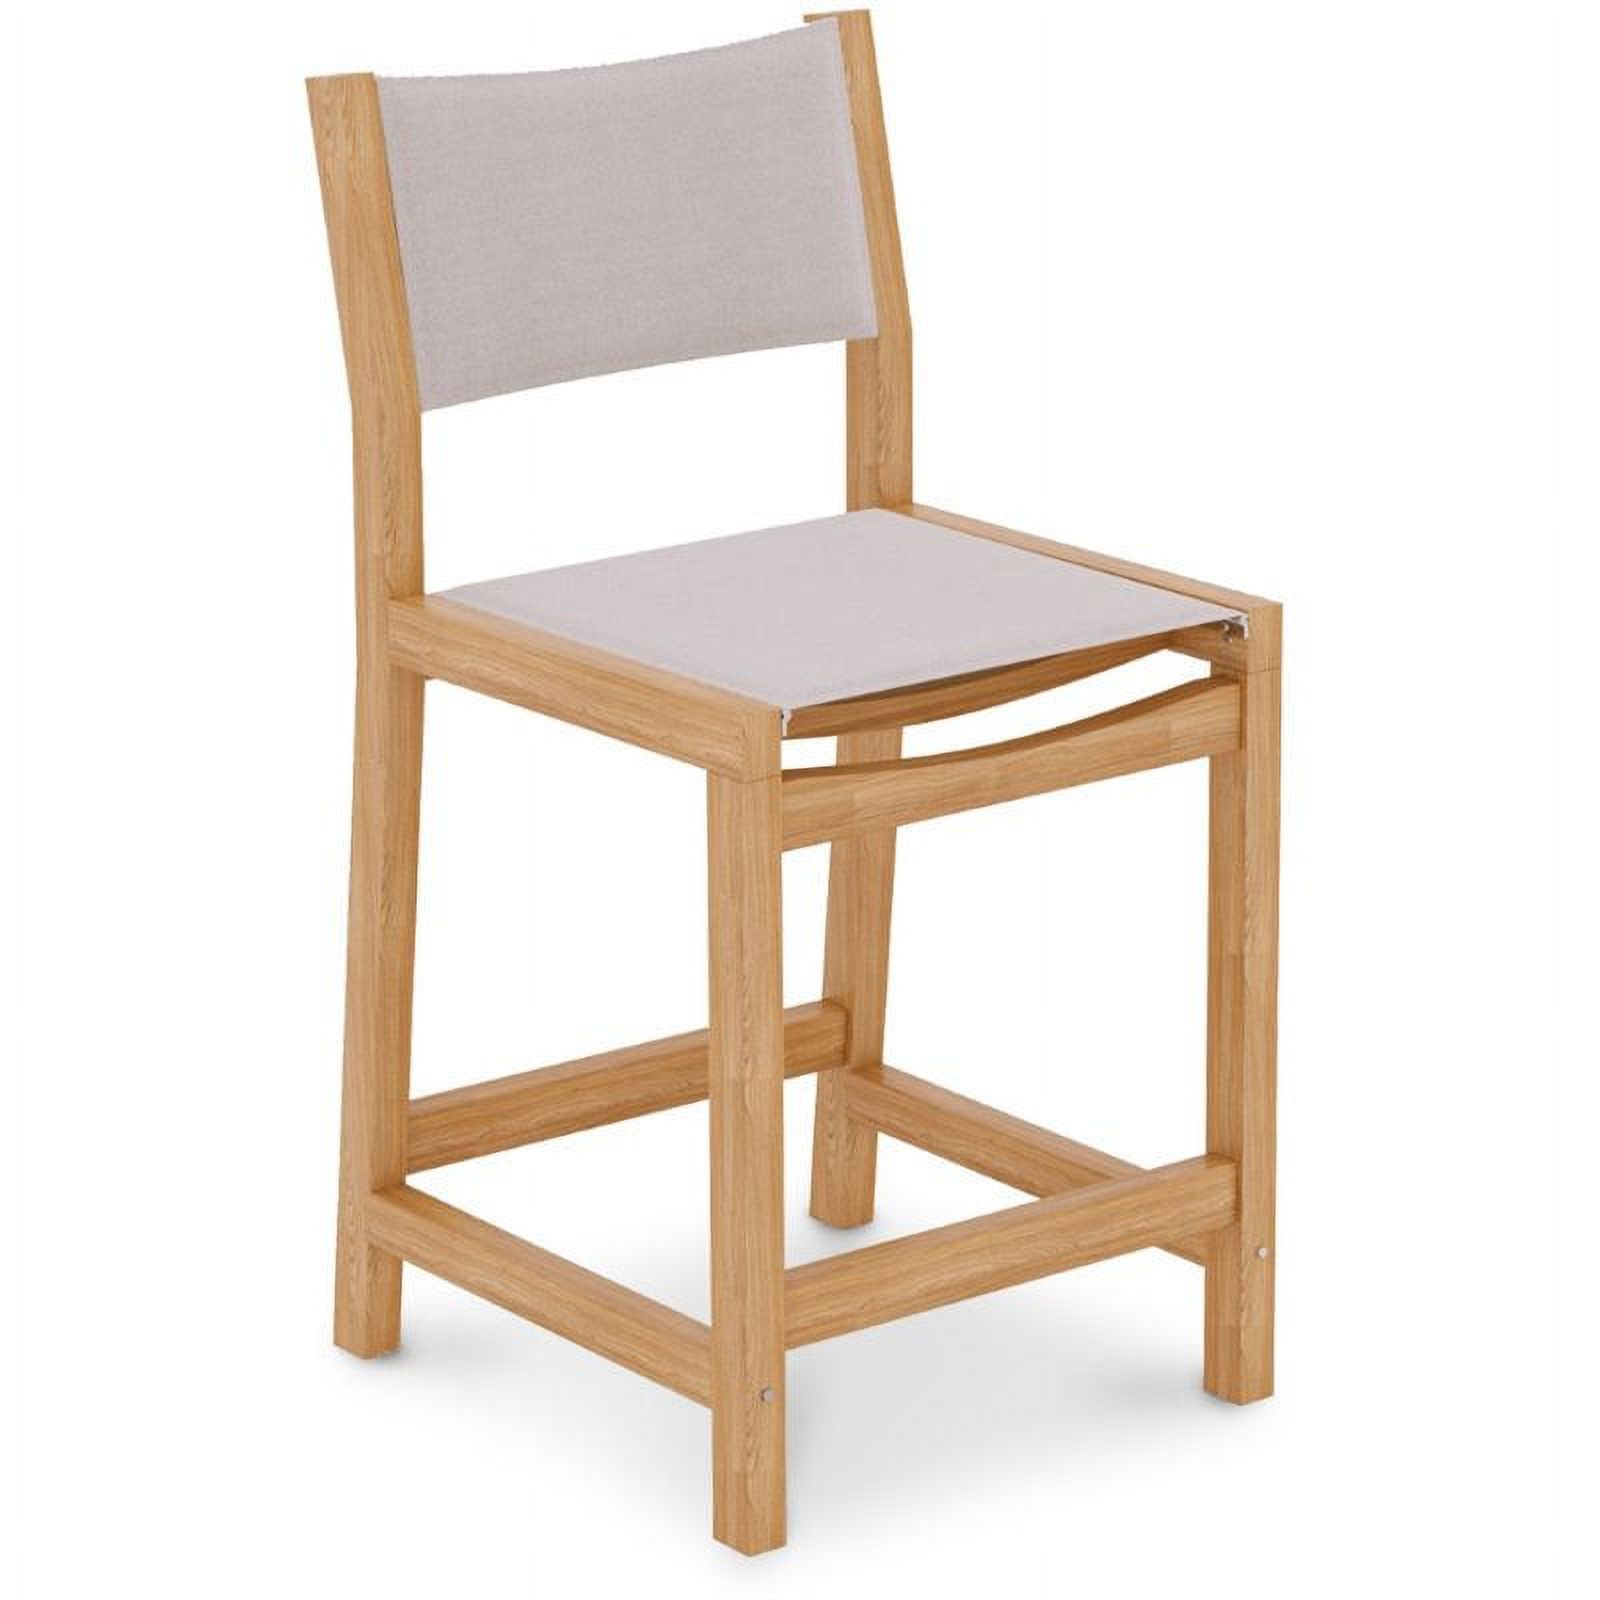 Home Square 26" Teak Wooden Patio Counter Stool in Natural and White - Set of 2 - image 2 of 4